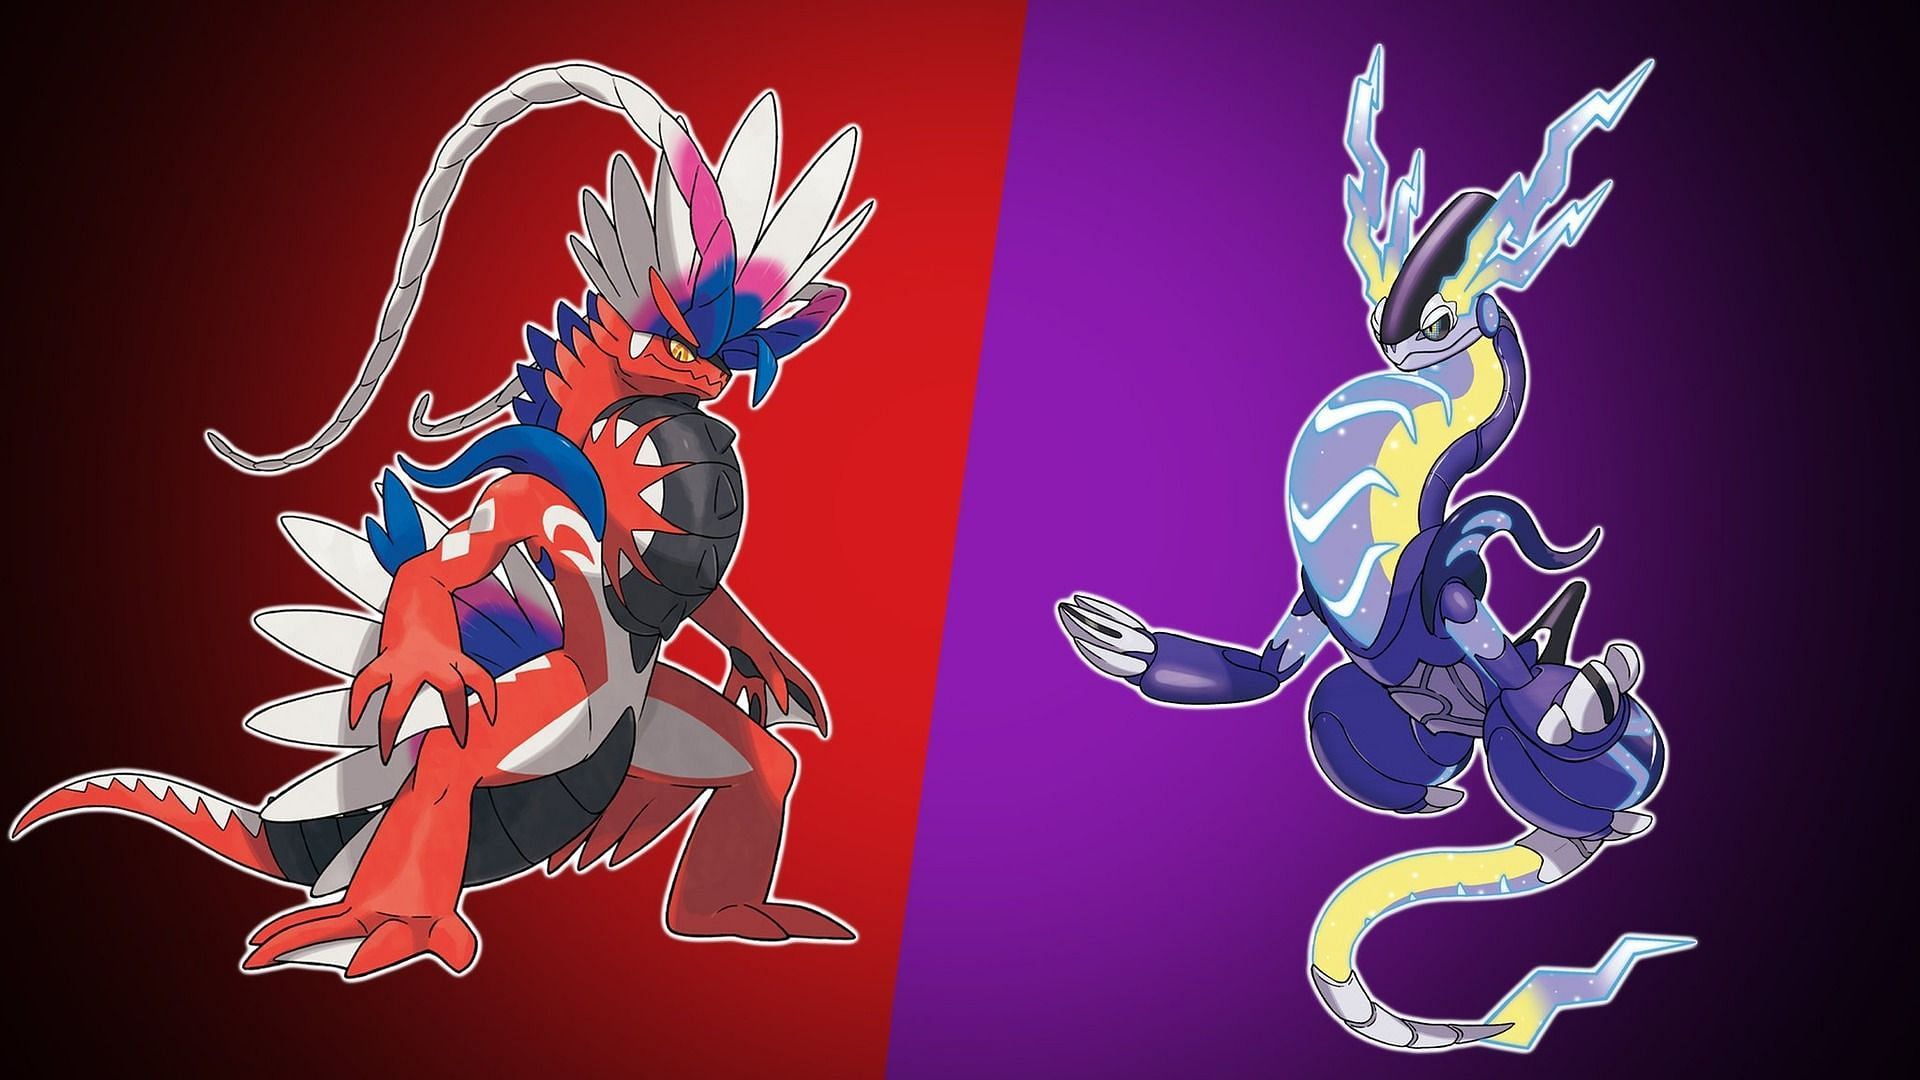 Official artwork for Pokemon Scarlet and Violet showcasing the two Legendary Pokemon for the games(Image via The Pokemon Company)